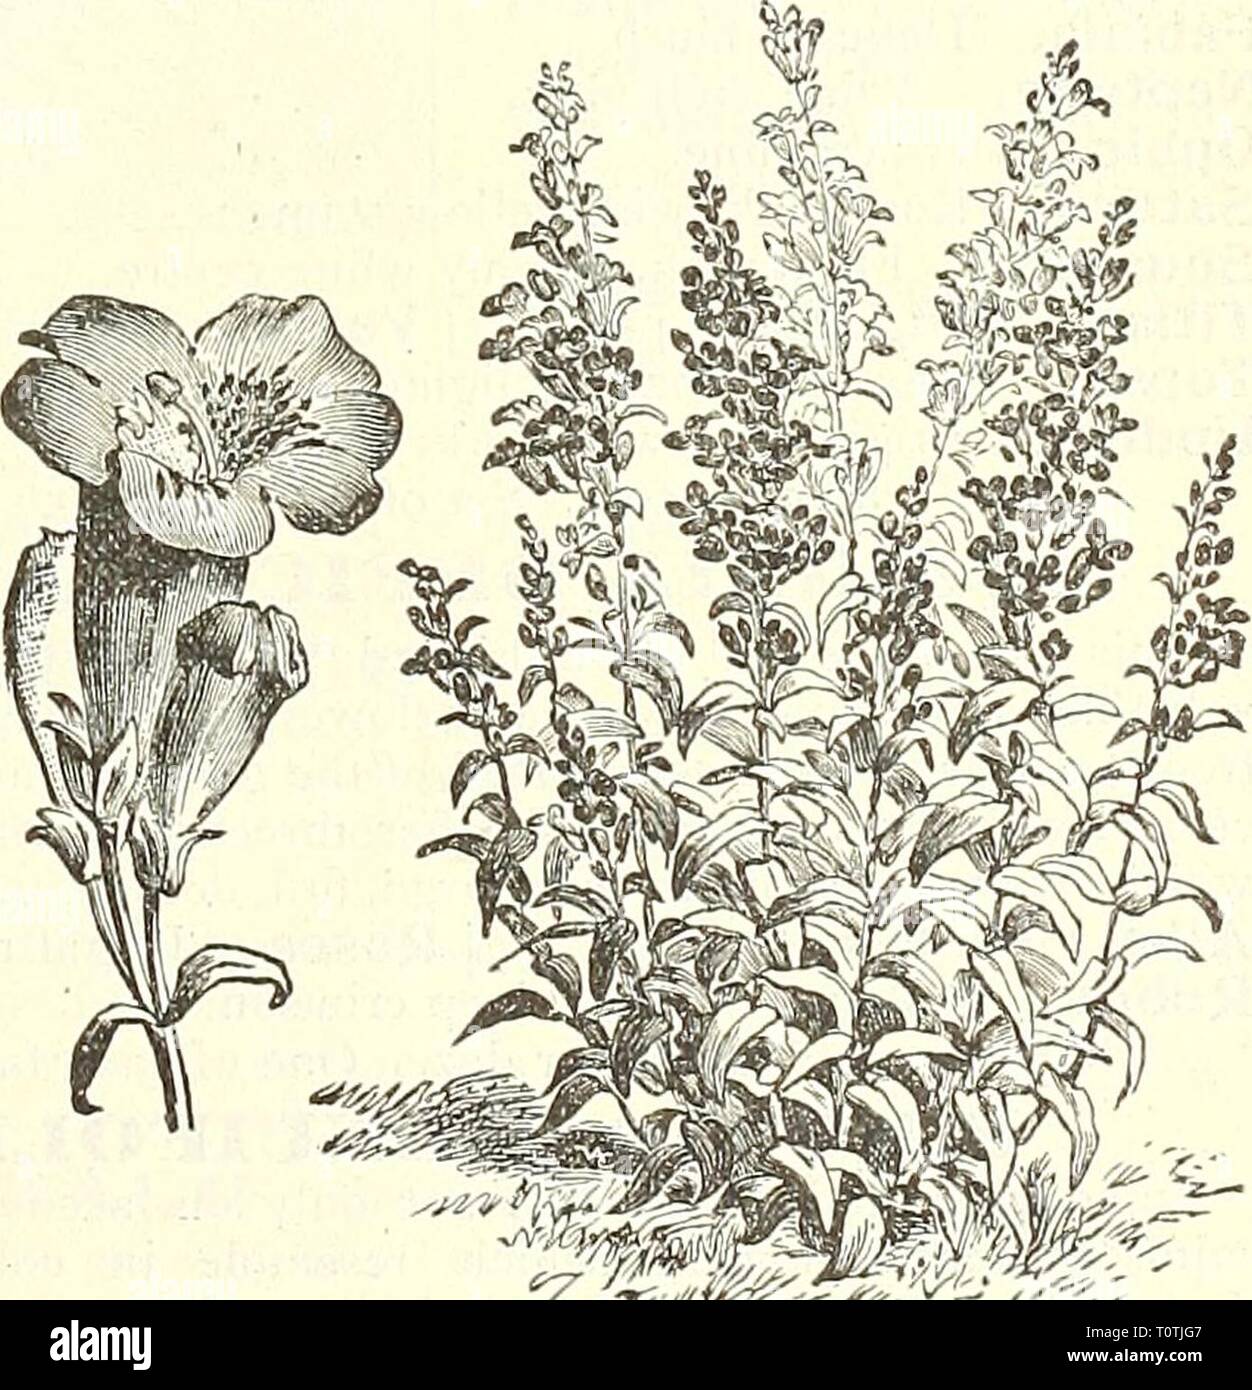 Dreer's garden book  1904 Dreer's garden book : 1904  dreersgardenbook1904henr Year: 1904  HARDV ORCHIDS. There is wealth of beauty in this little cultivated class of plants. All the sorts that we quote -below are quite hardy. Calopogon pulchellus ( G'/vjij Pink). Bright pink, fragrant flowers. Cypripedium acaule {Lady's Slipper). Broad, oval foliage, and showy, bright pink, lighter-veined, curi- ously-formed flowers. â parviflorum {S//ia/l 'i'dloiv Bright yellow. â pubescens ( Yellow Ladfs showy, liriglil yellow. â spectabile {Moccasin-Fknver, Slipper). Clusters of beautifully formed v^â hite Stock Photo